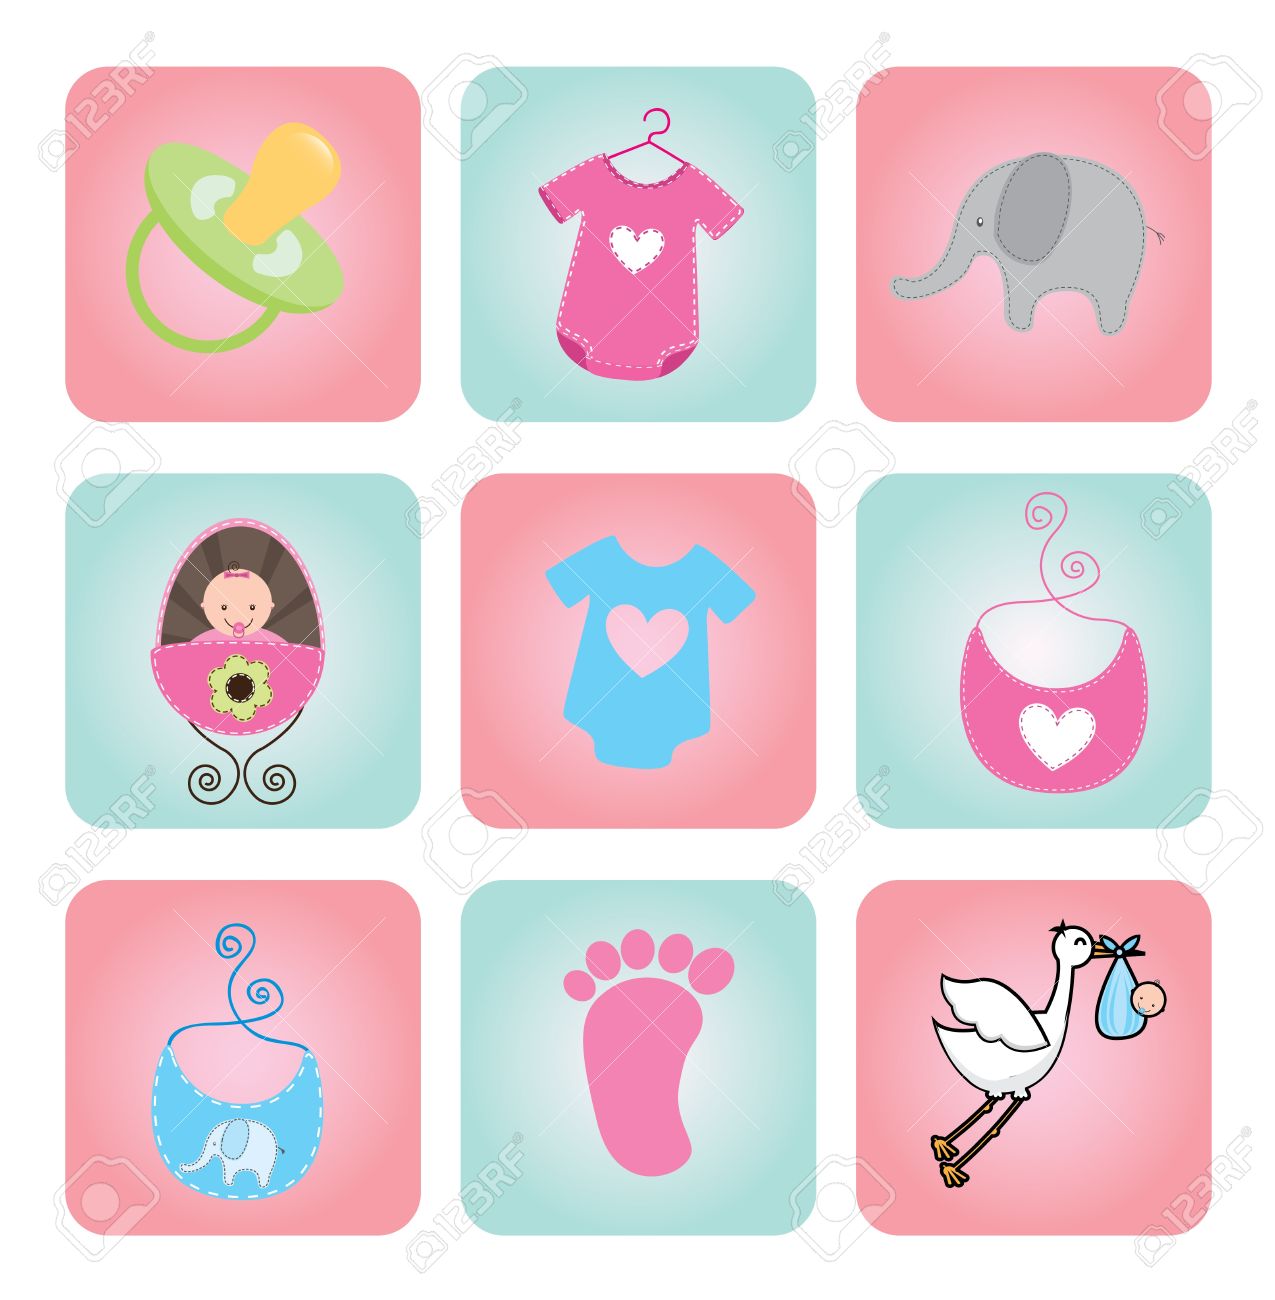 Baby Shower Illustration stock vector. Illustration of welcome 